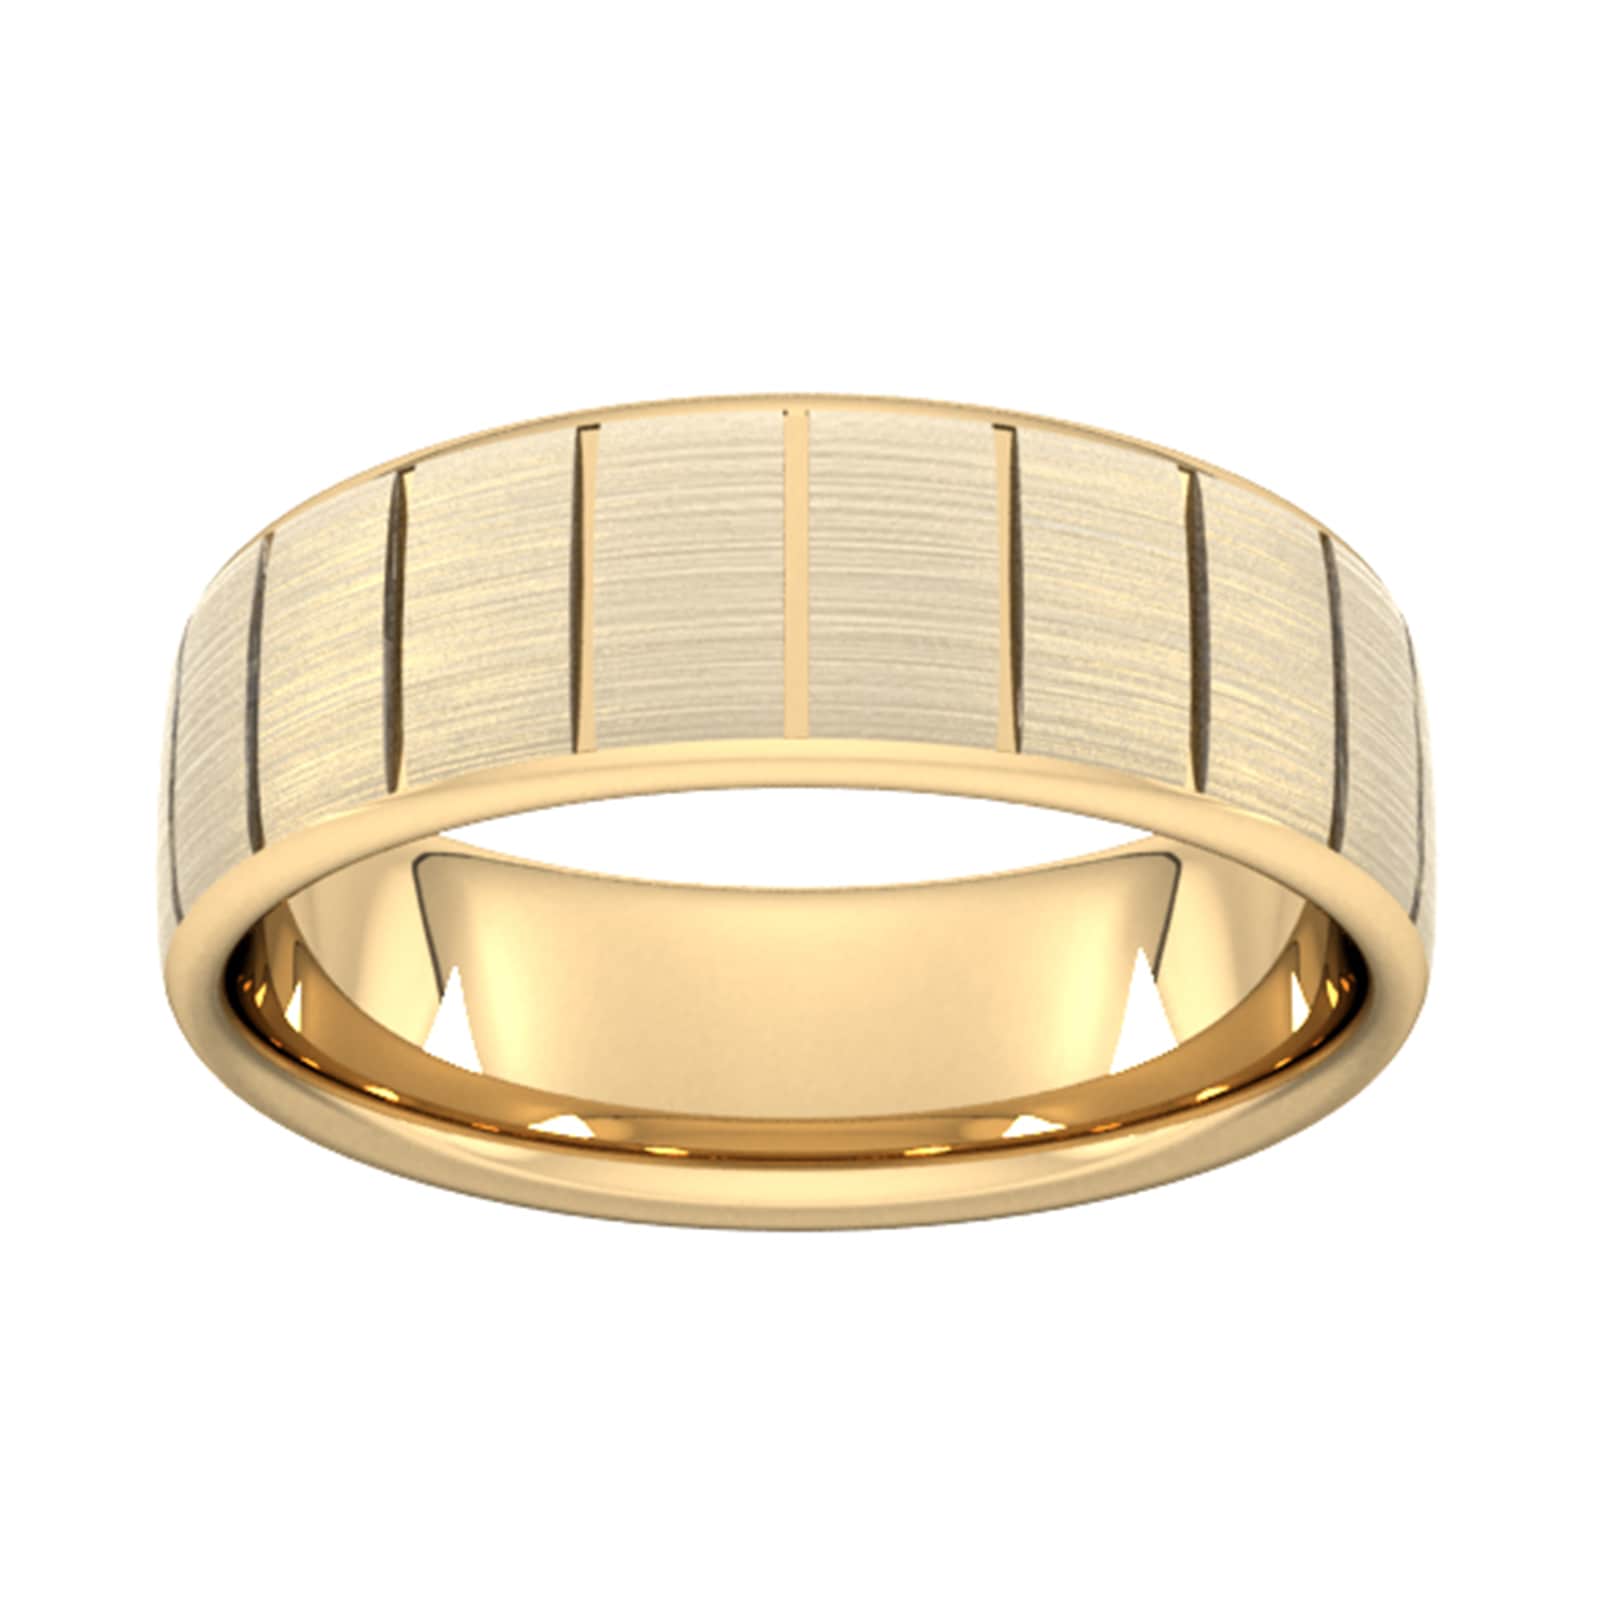 7mm Slight Court Heavy Vertical Lines Wedding Ring In 18 Carat Yellow Gold - Ring Size G